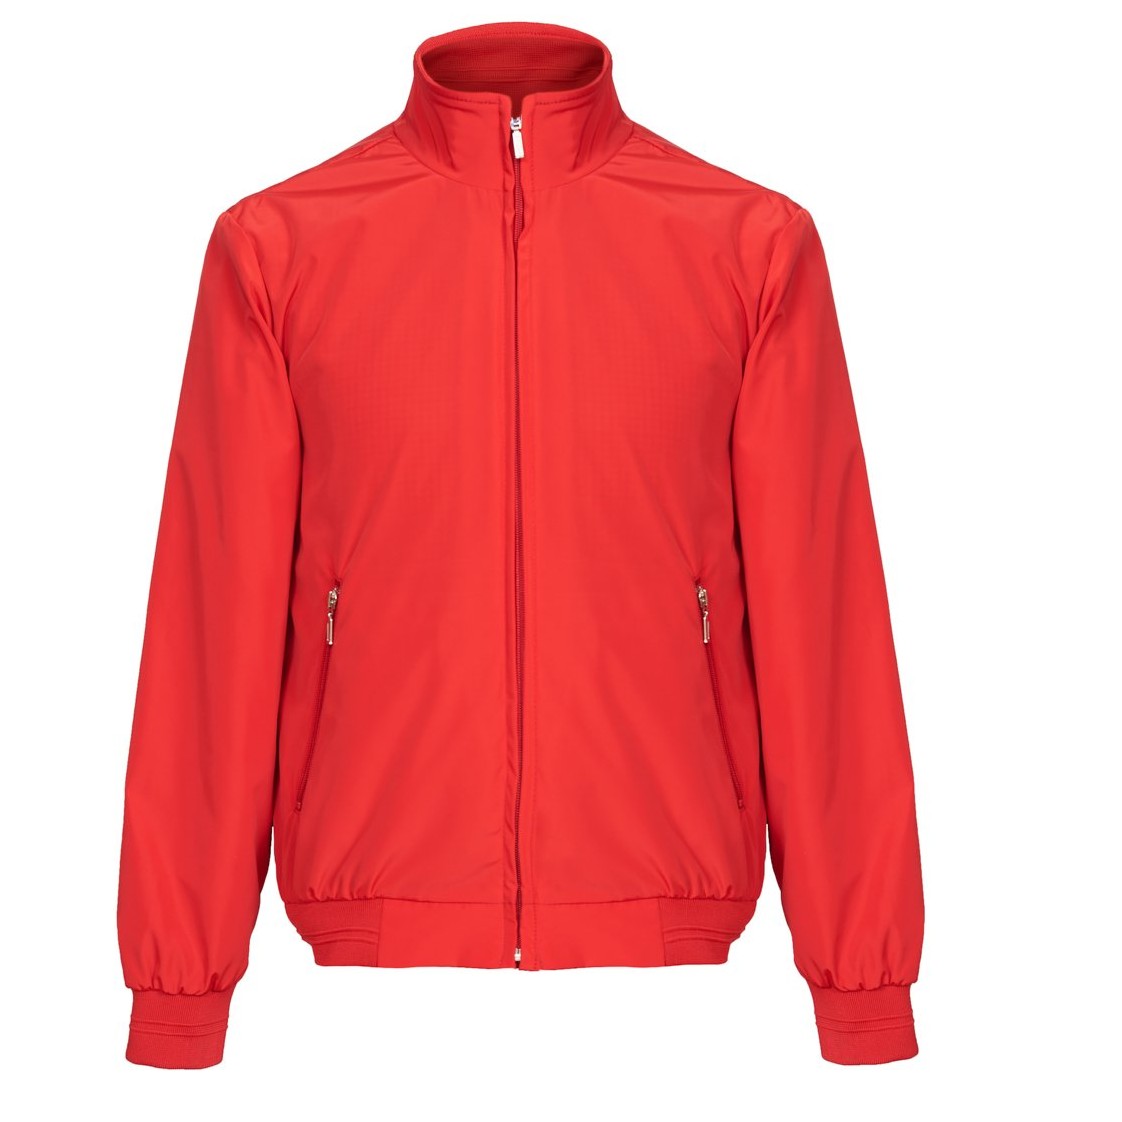 Unisex Fine Polyester Jacket- Delicias Style- Red Color